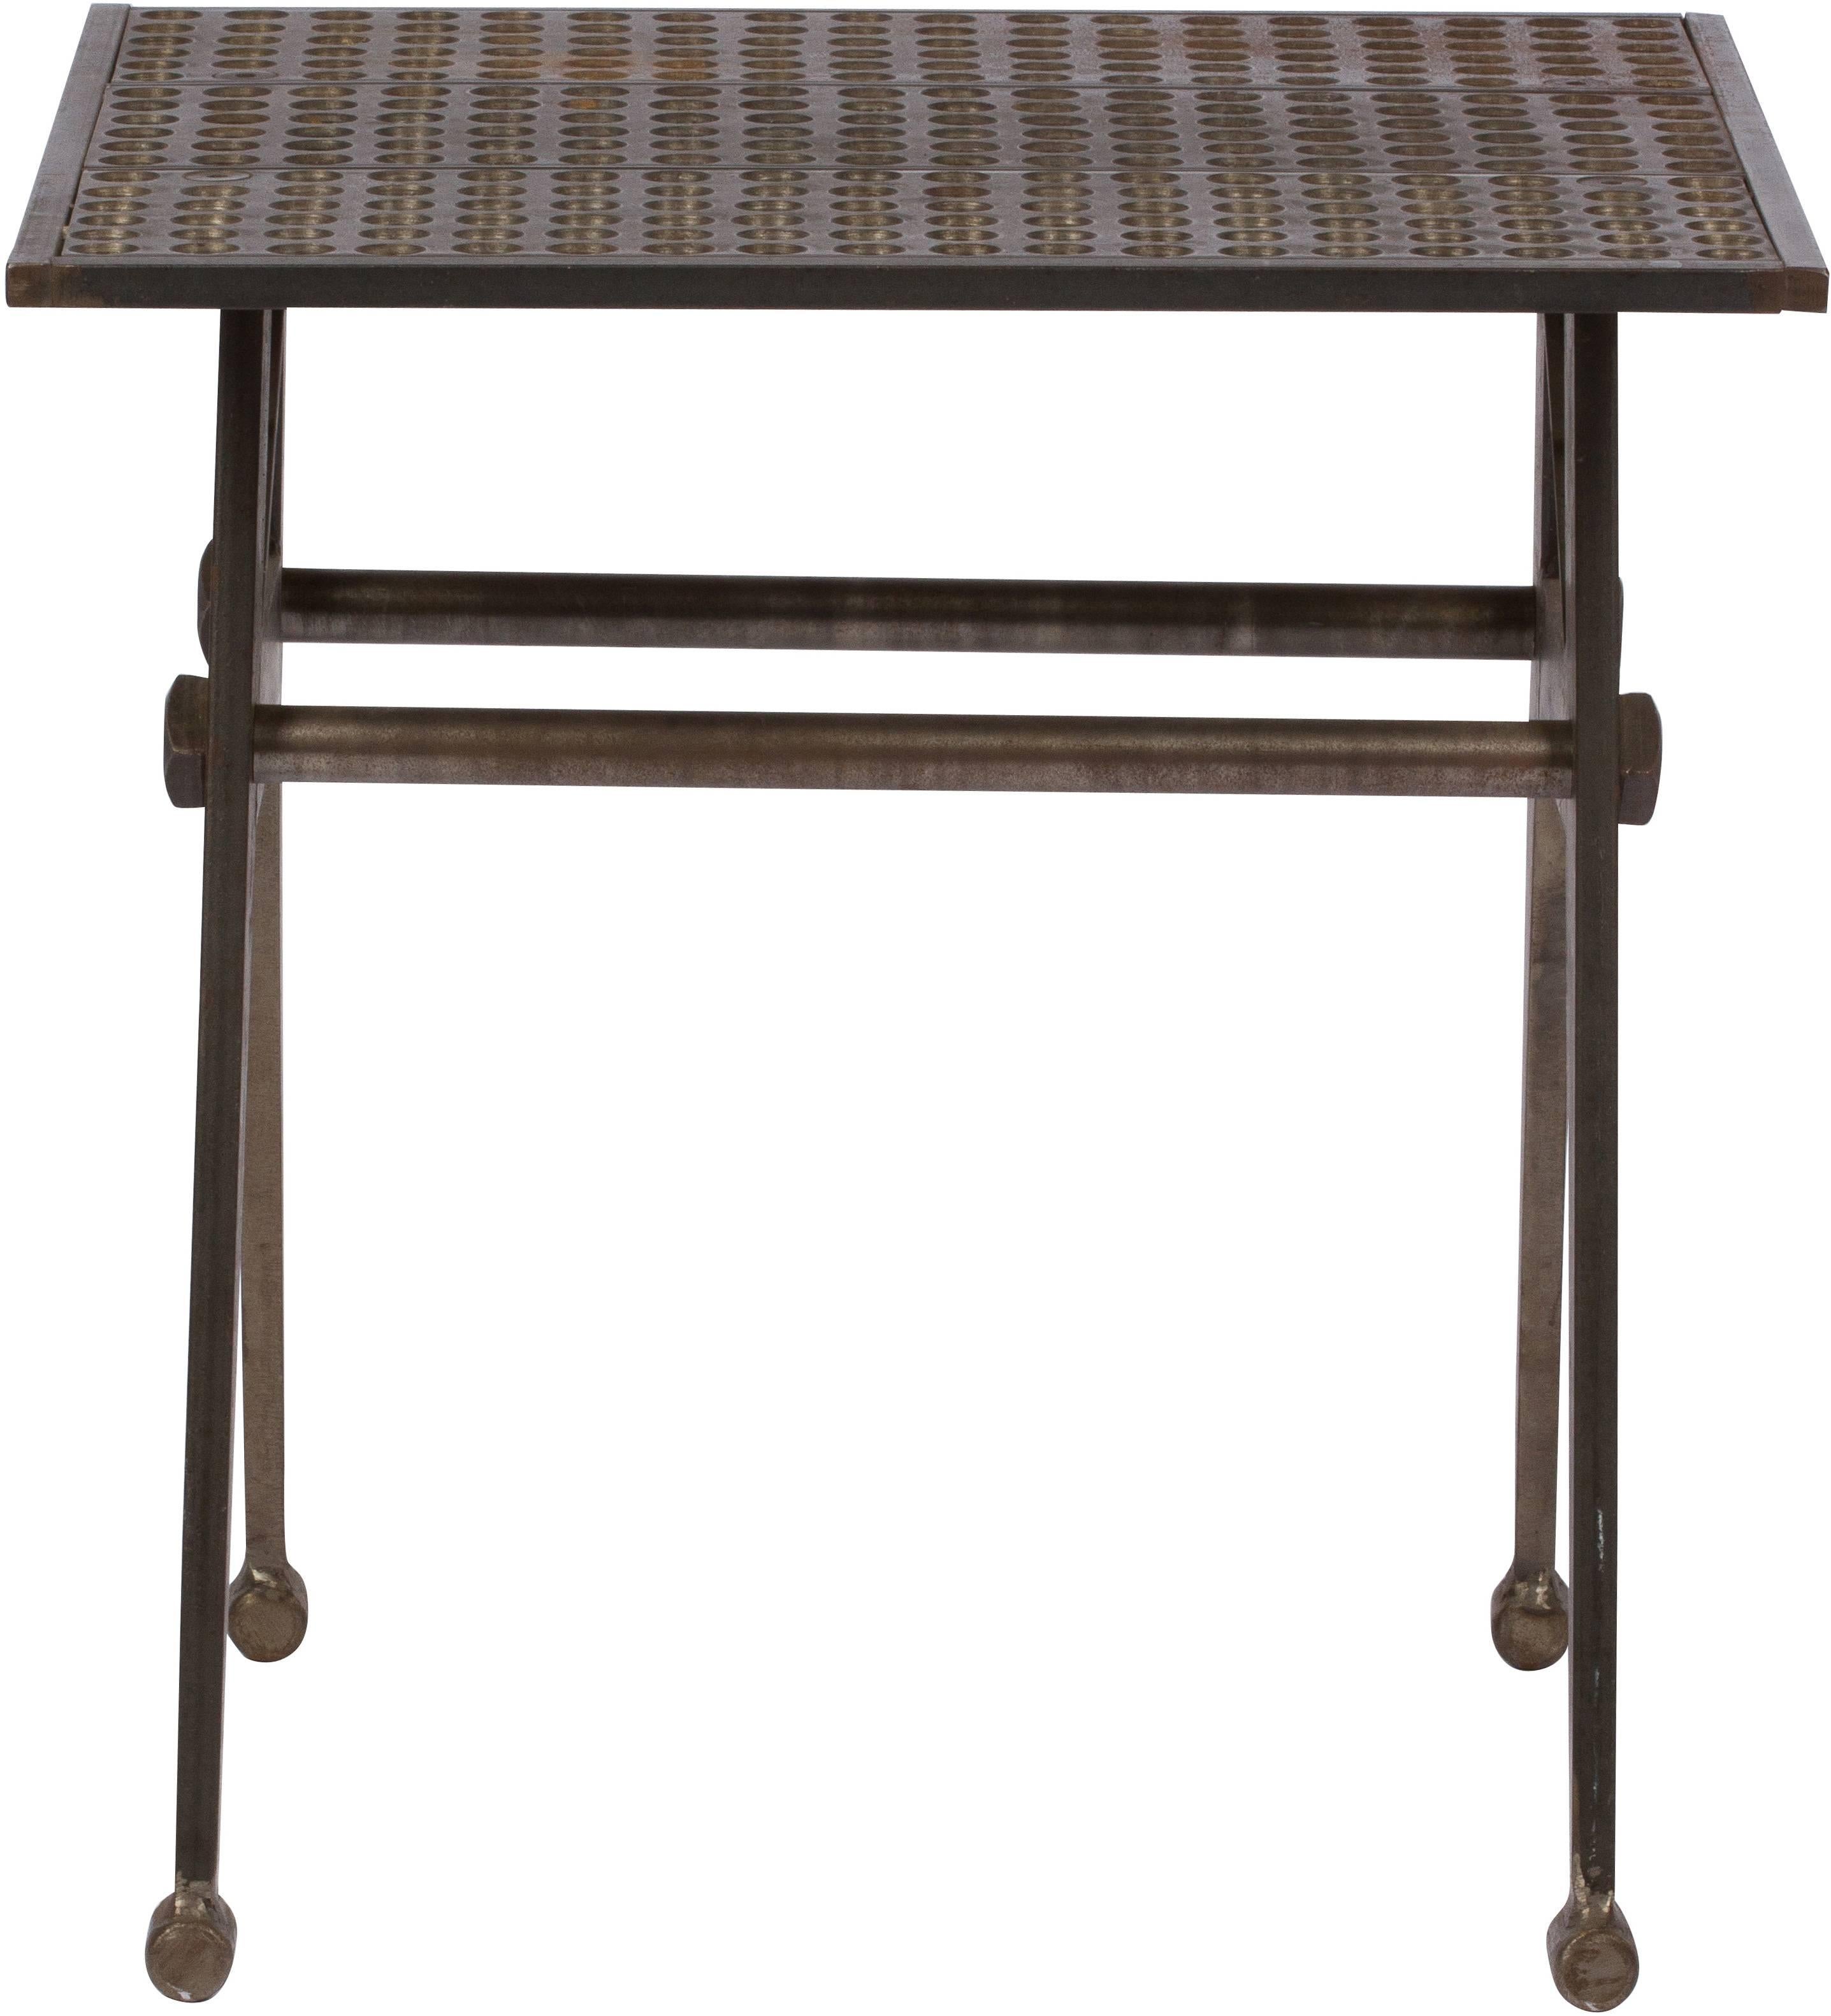 Industrial metal side table with a perforated metal top and scissor-like legs. Chic and masculine, the table is reminiscent of styles by Jean Prouve.